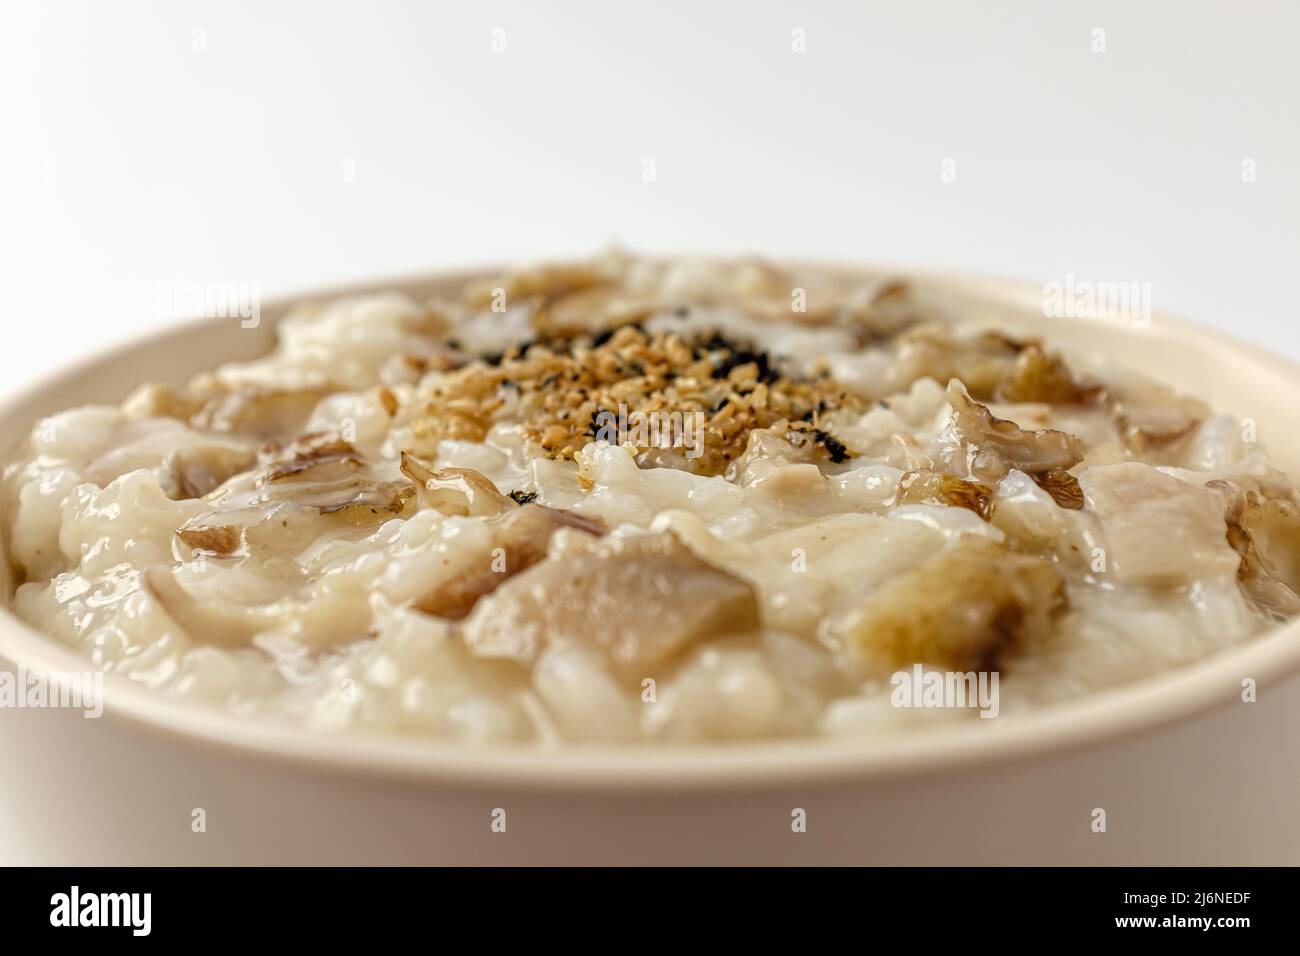 food with abalone. porridge made by boiling rice. dishes with seafood Stock Photo